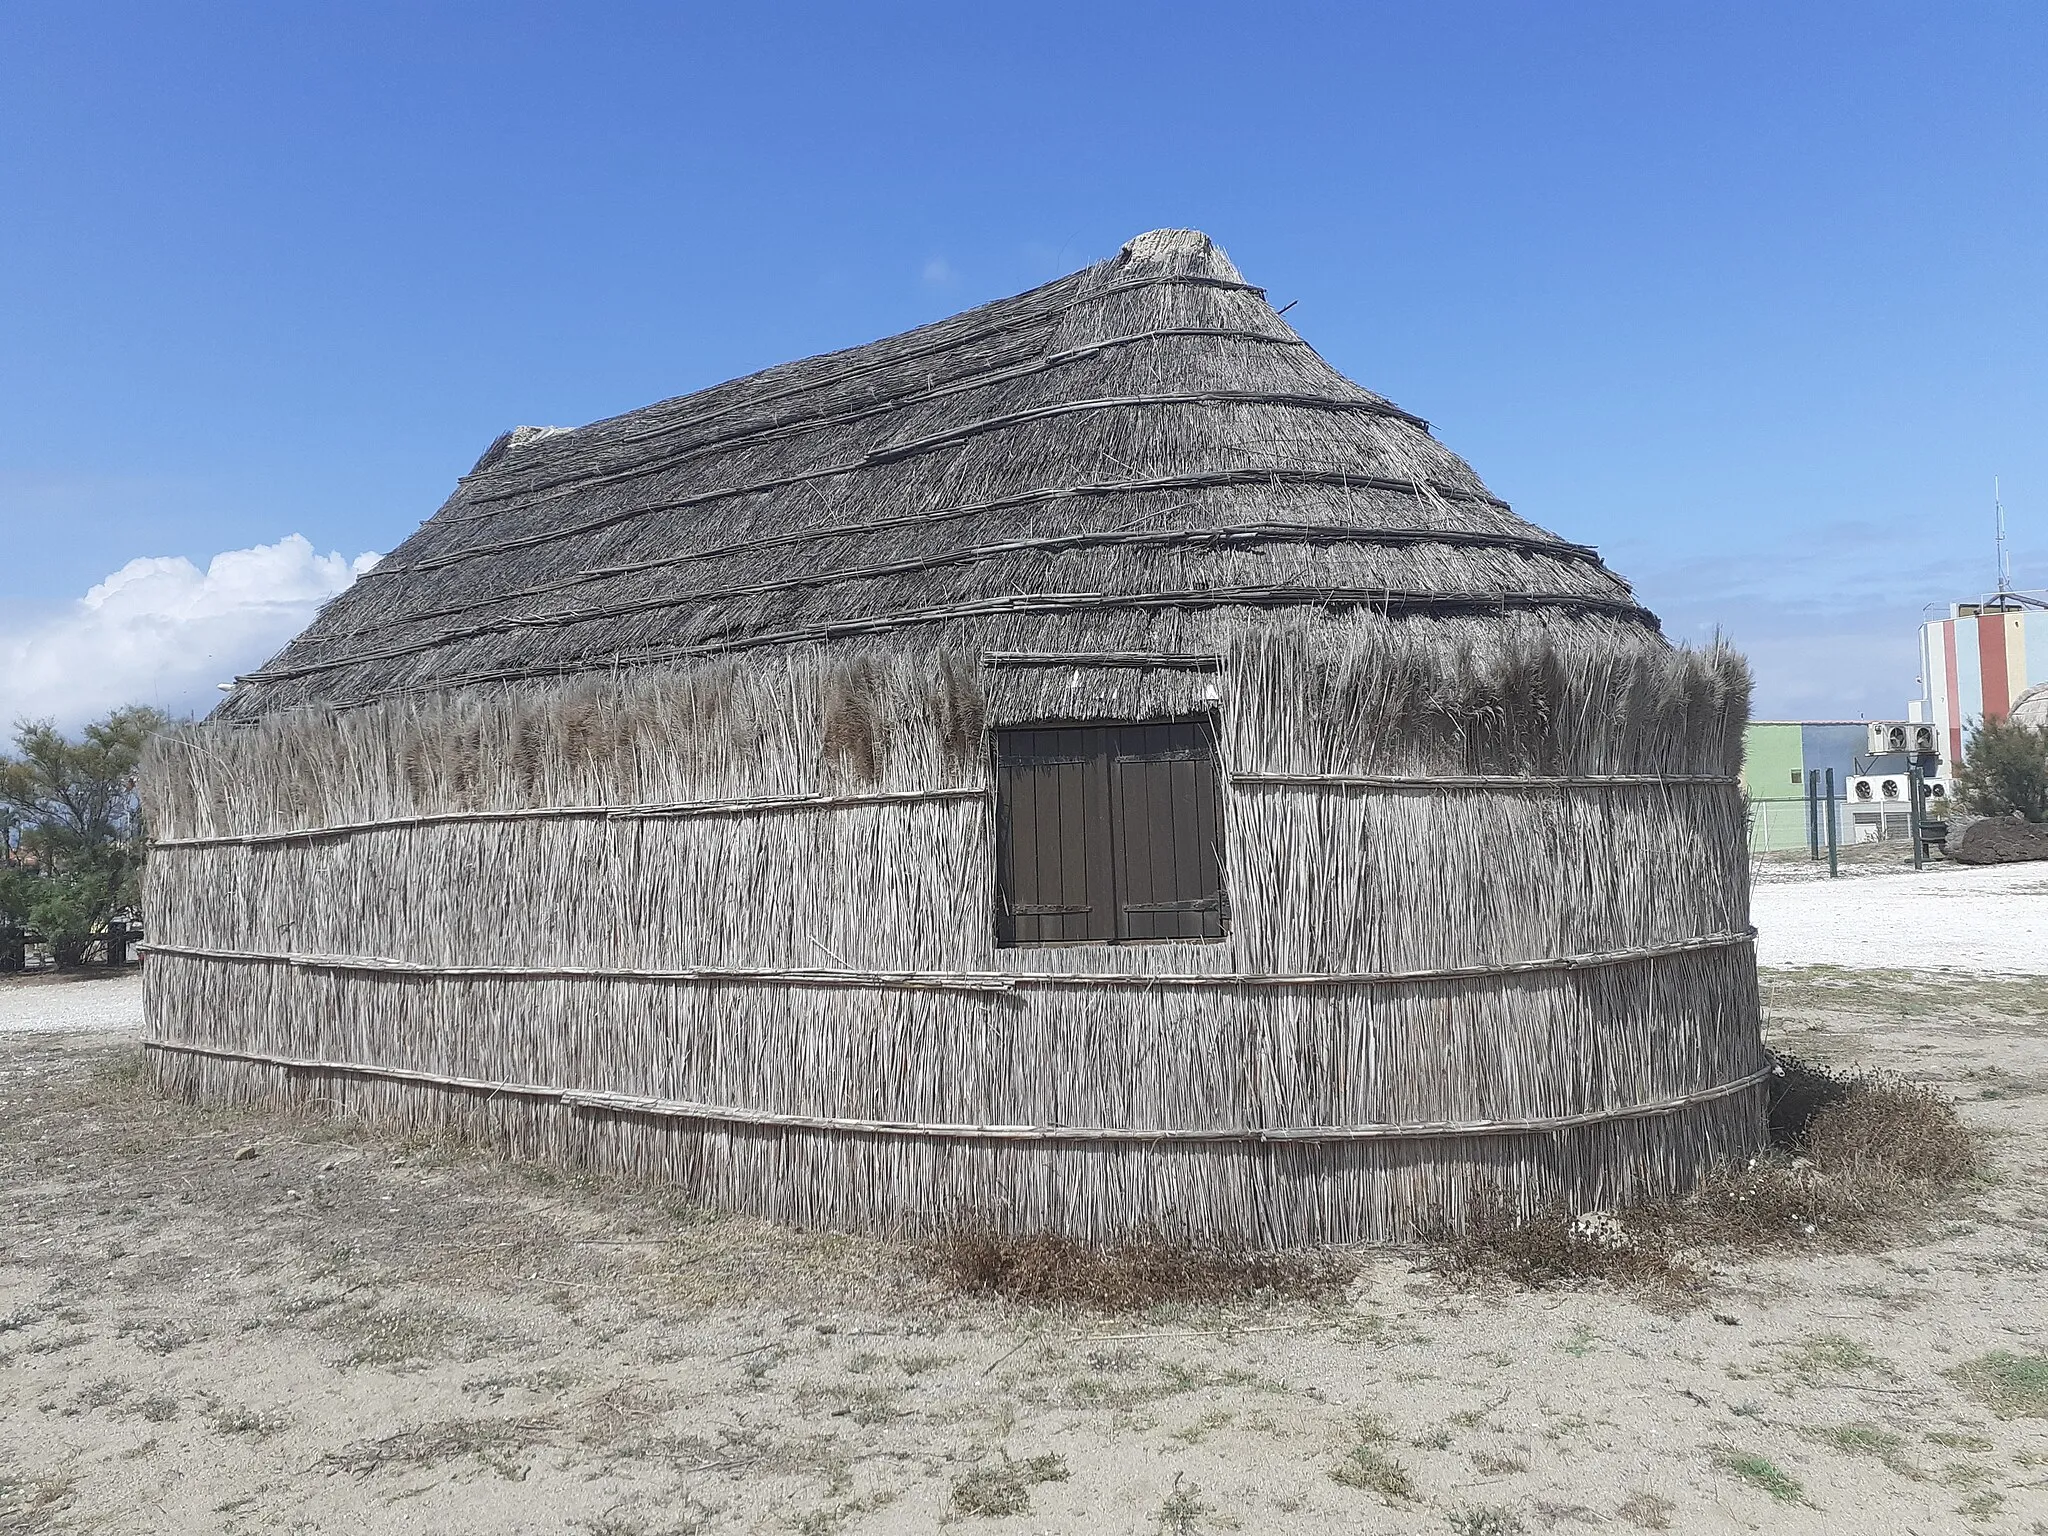 Photo showing: This is a hut restored from a traditional 19th century fishing village on the Mediterranean coast in Le Barcares, Catalonia, South of France.